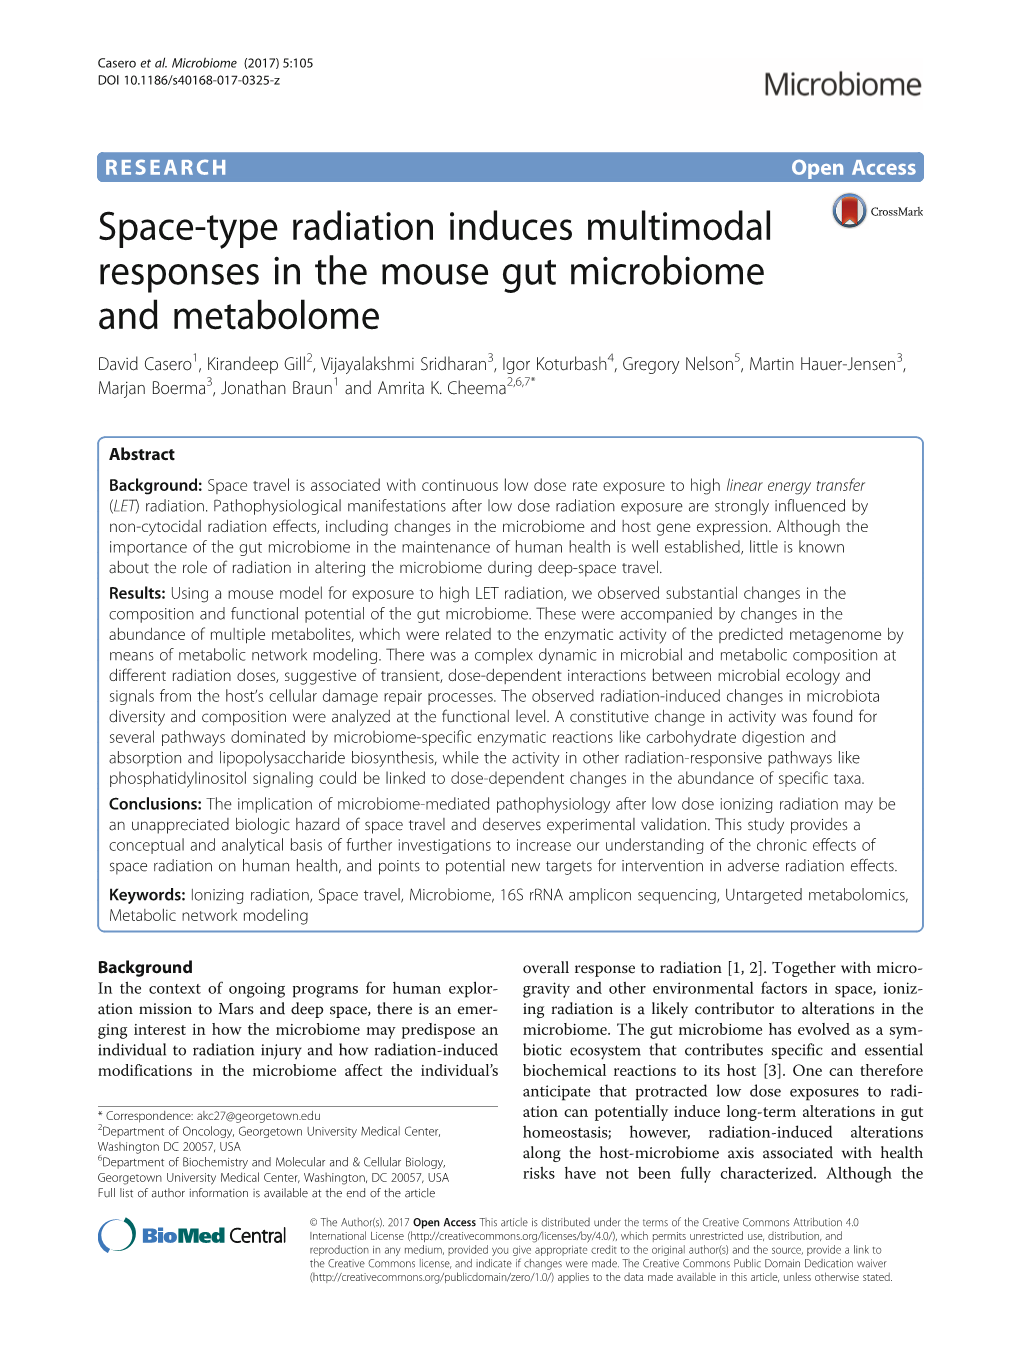 Space-Type Radiation Induces Multimodal Responses in the Mouse